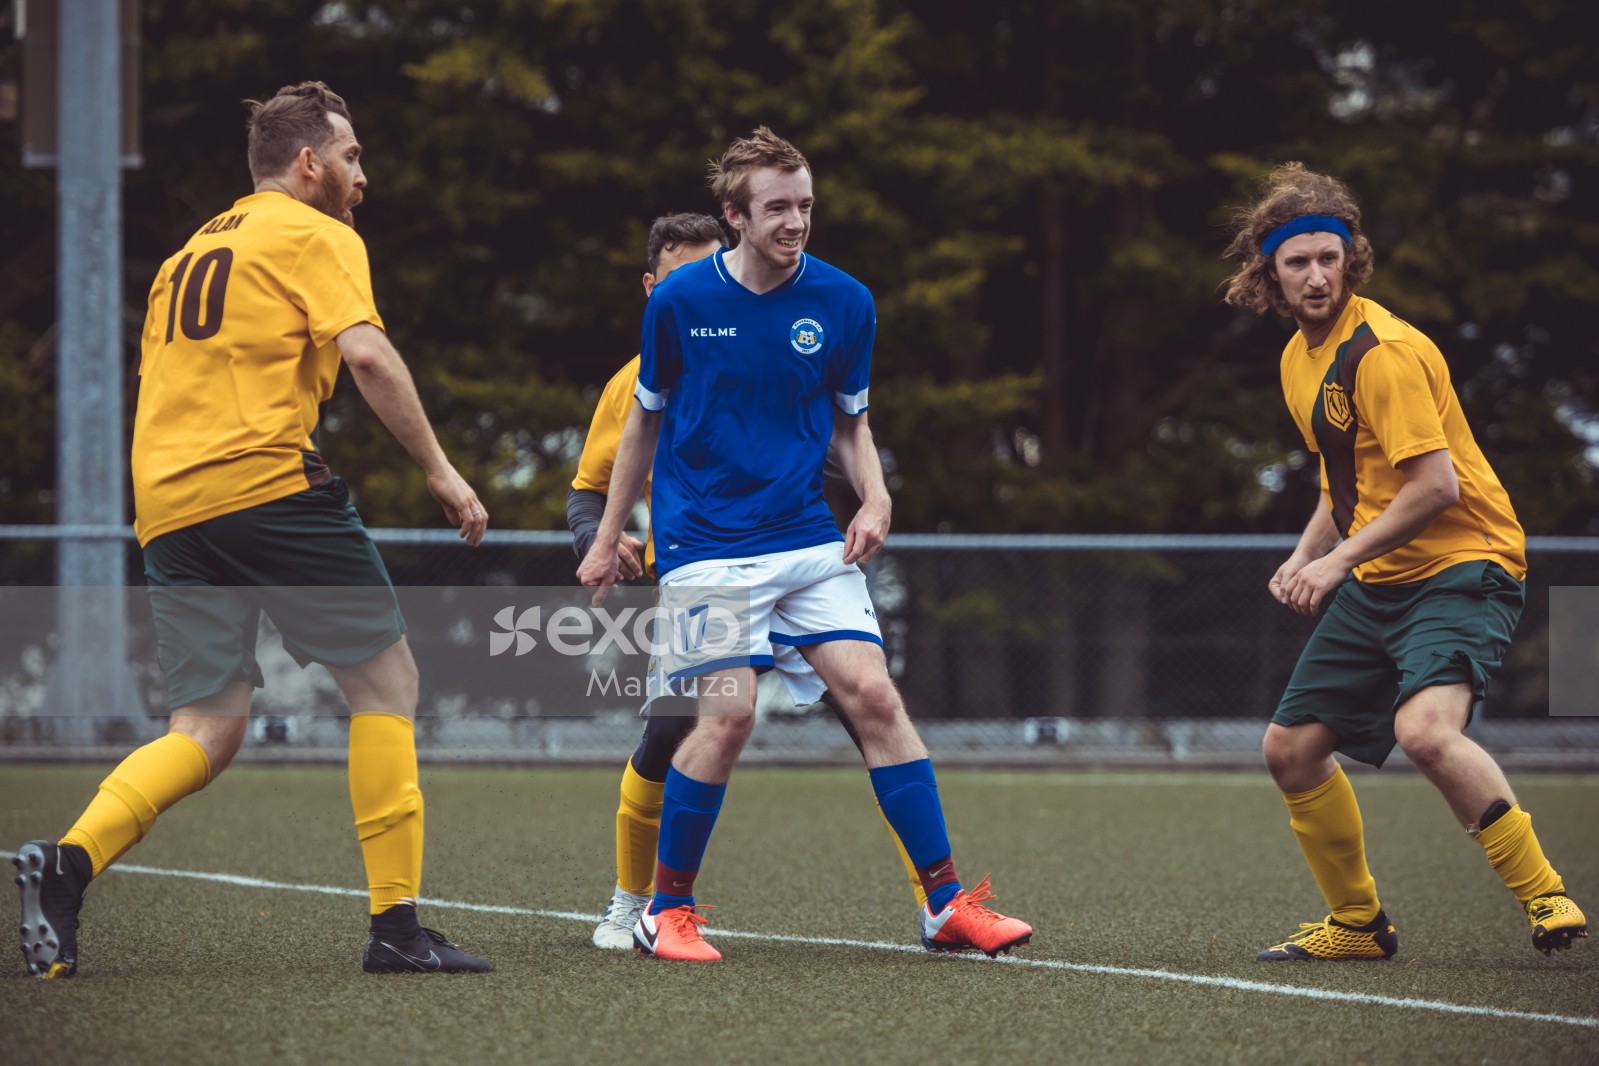 Player in blue shirt orange cleats surrounded by opposing team - Sports Zone sunday league